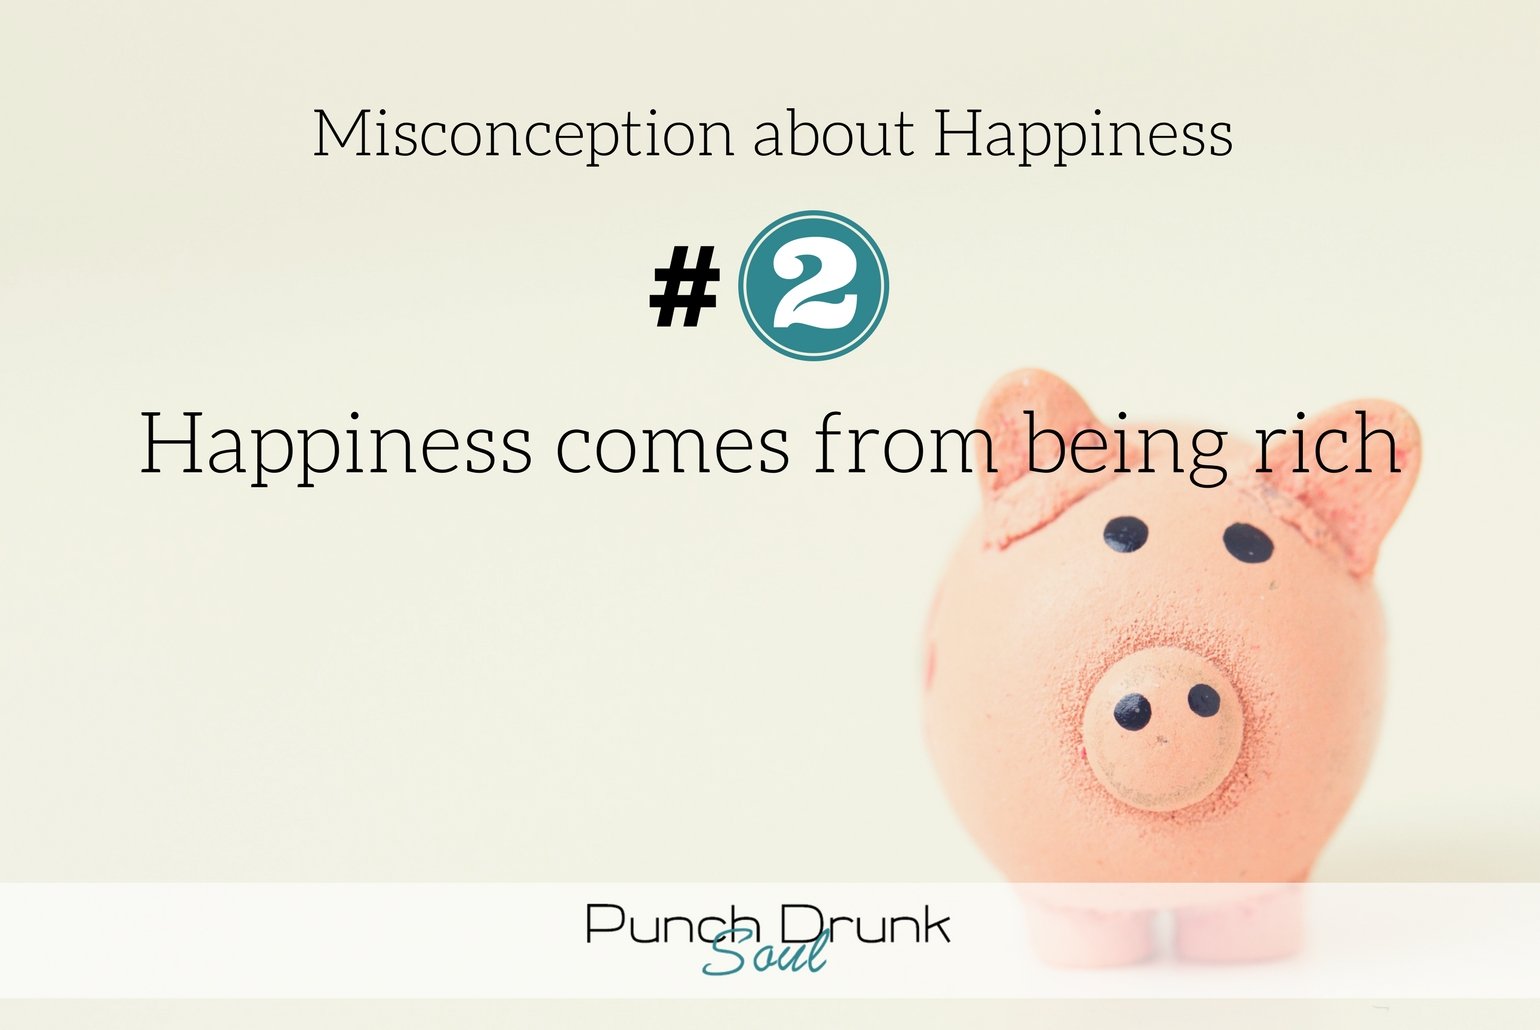 Misconceptions about happiness, How to be happy, pursuit of happiness, happiness, being happy, Key to happiness, how to find happiness